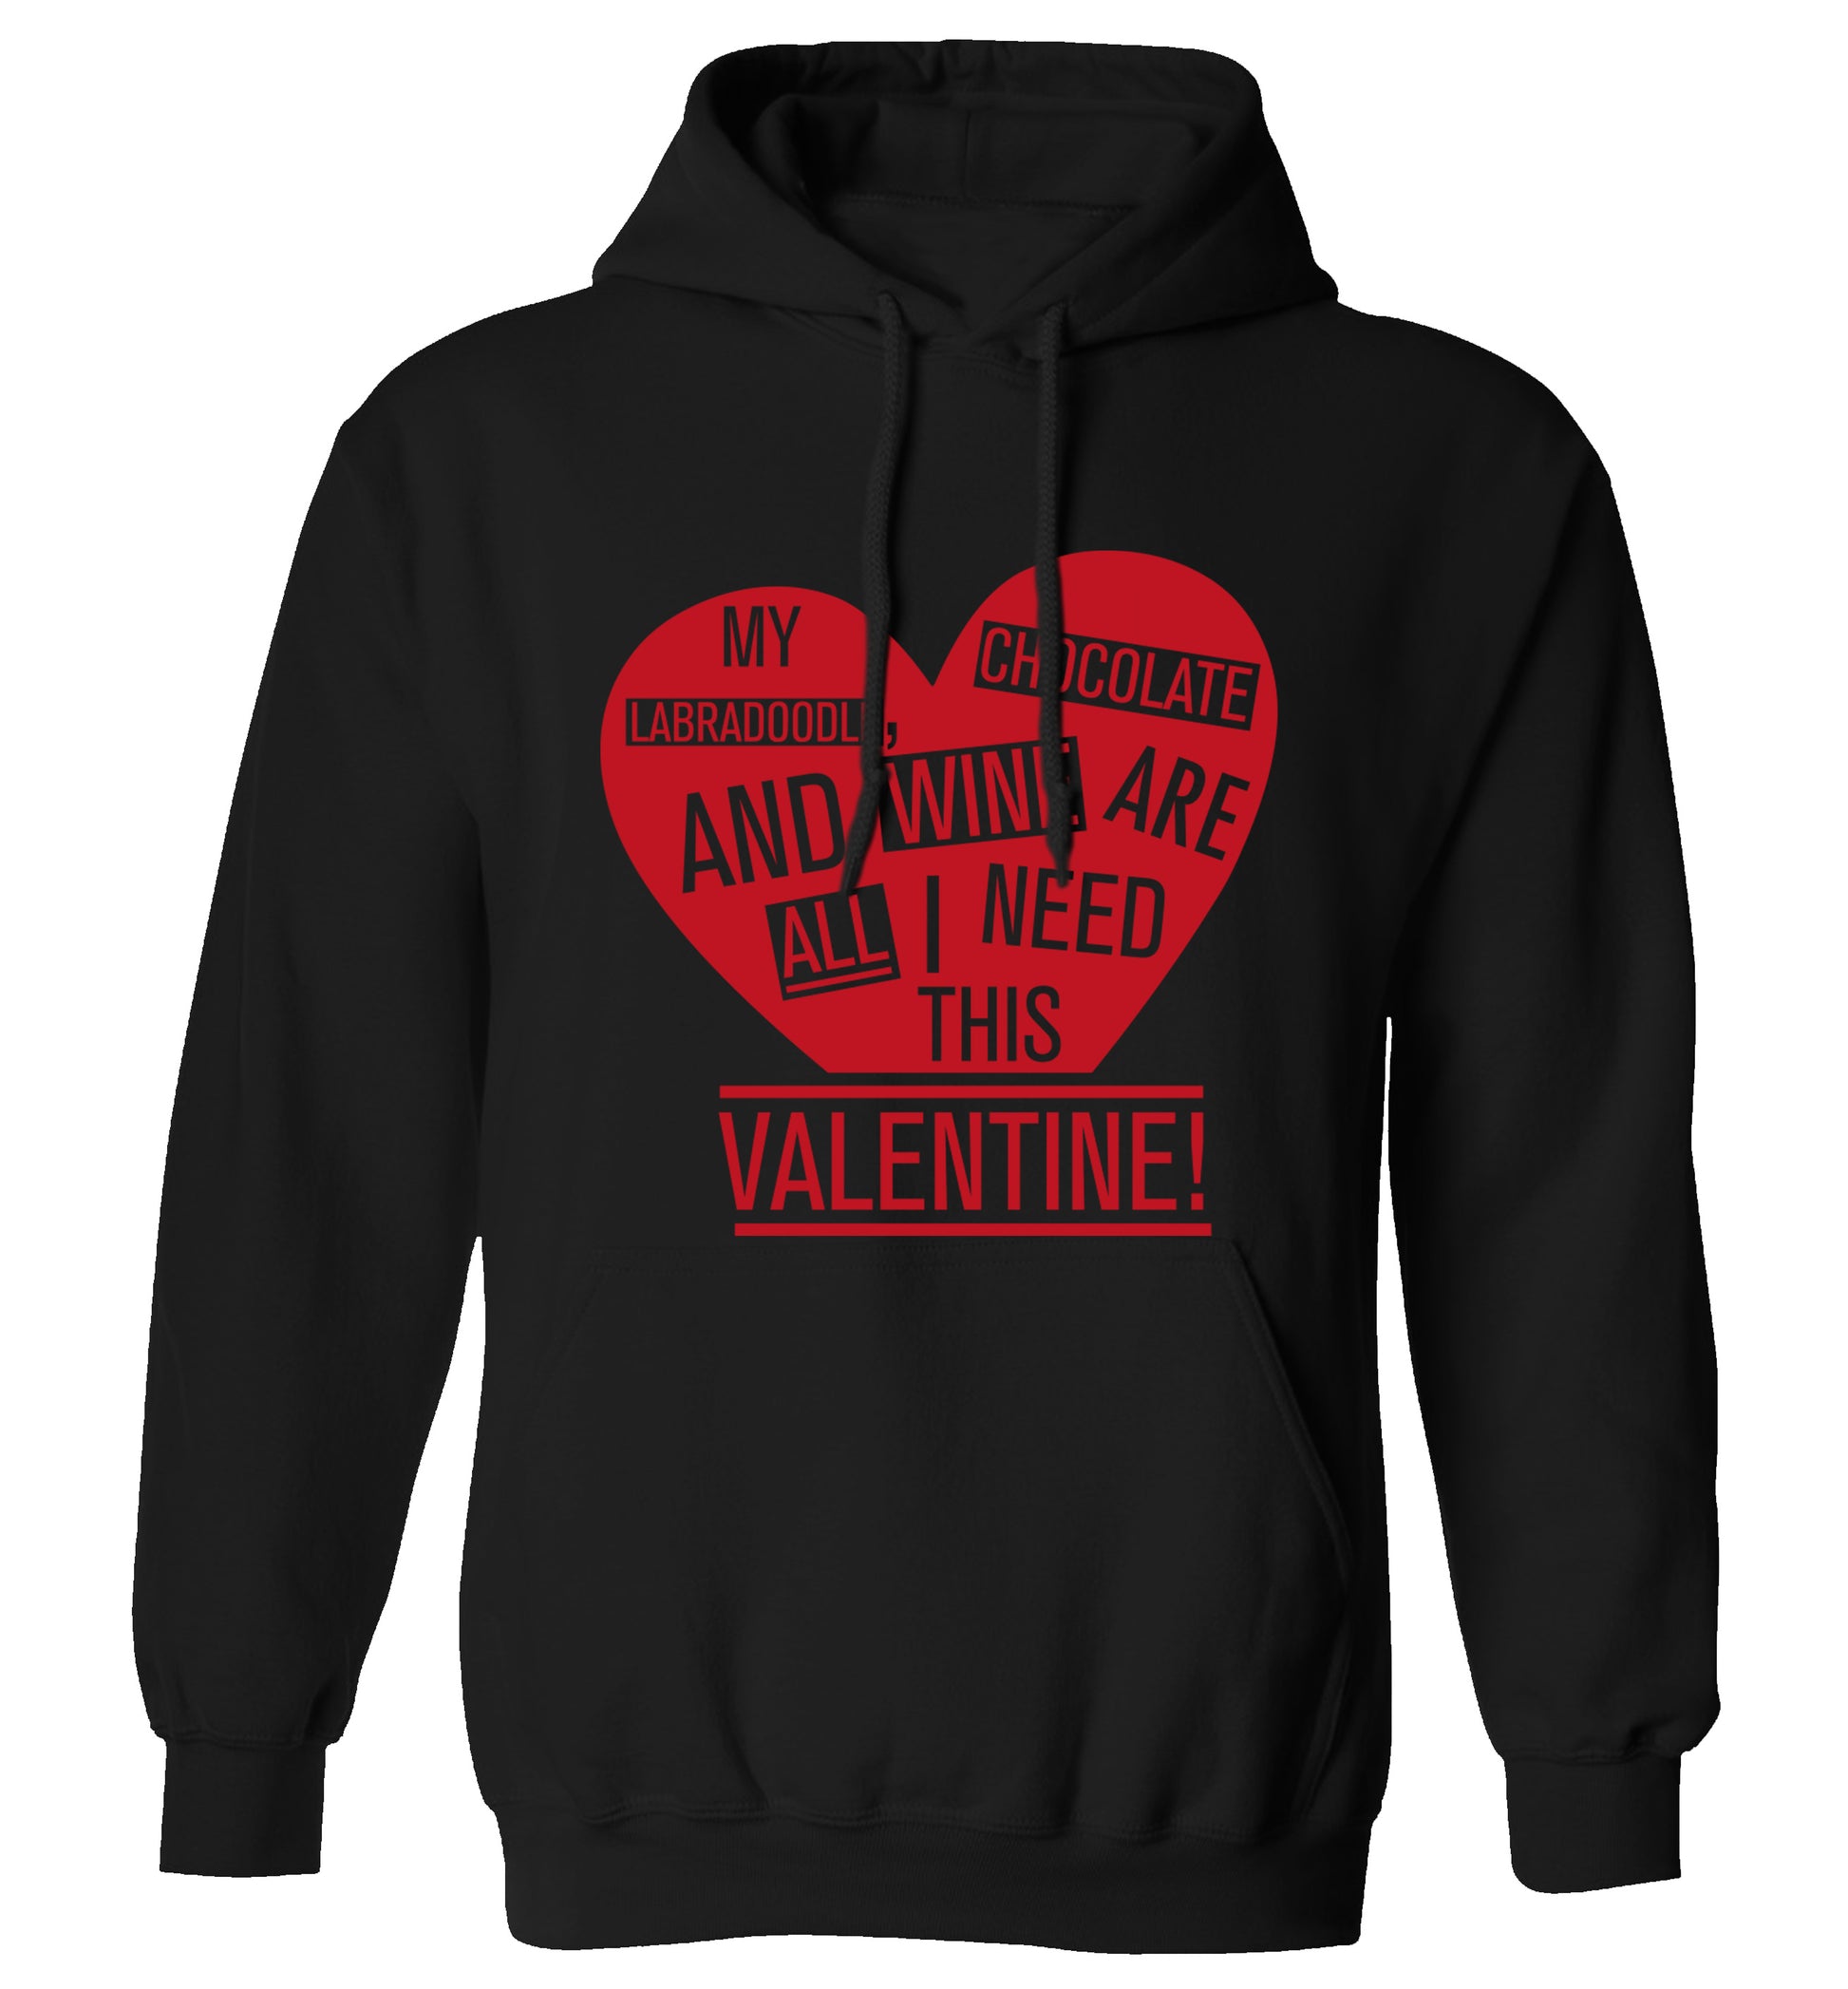 My labradoodle, chocolate and wine are all I need this valentine! adults unisex black hoodie 2XL